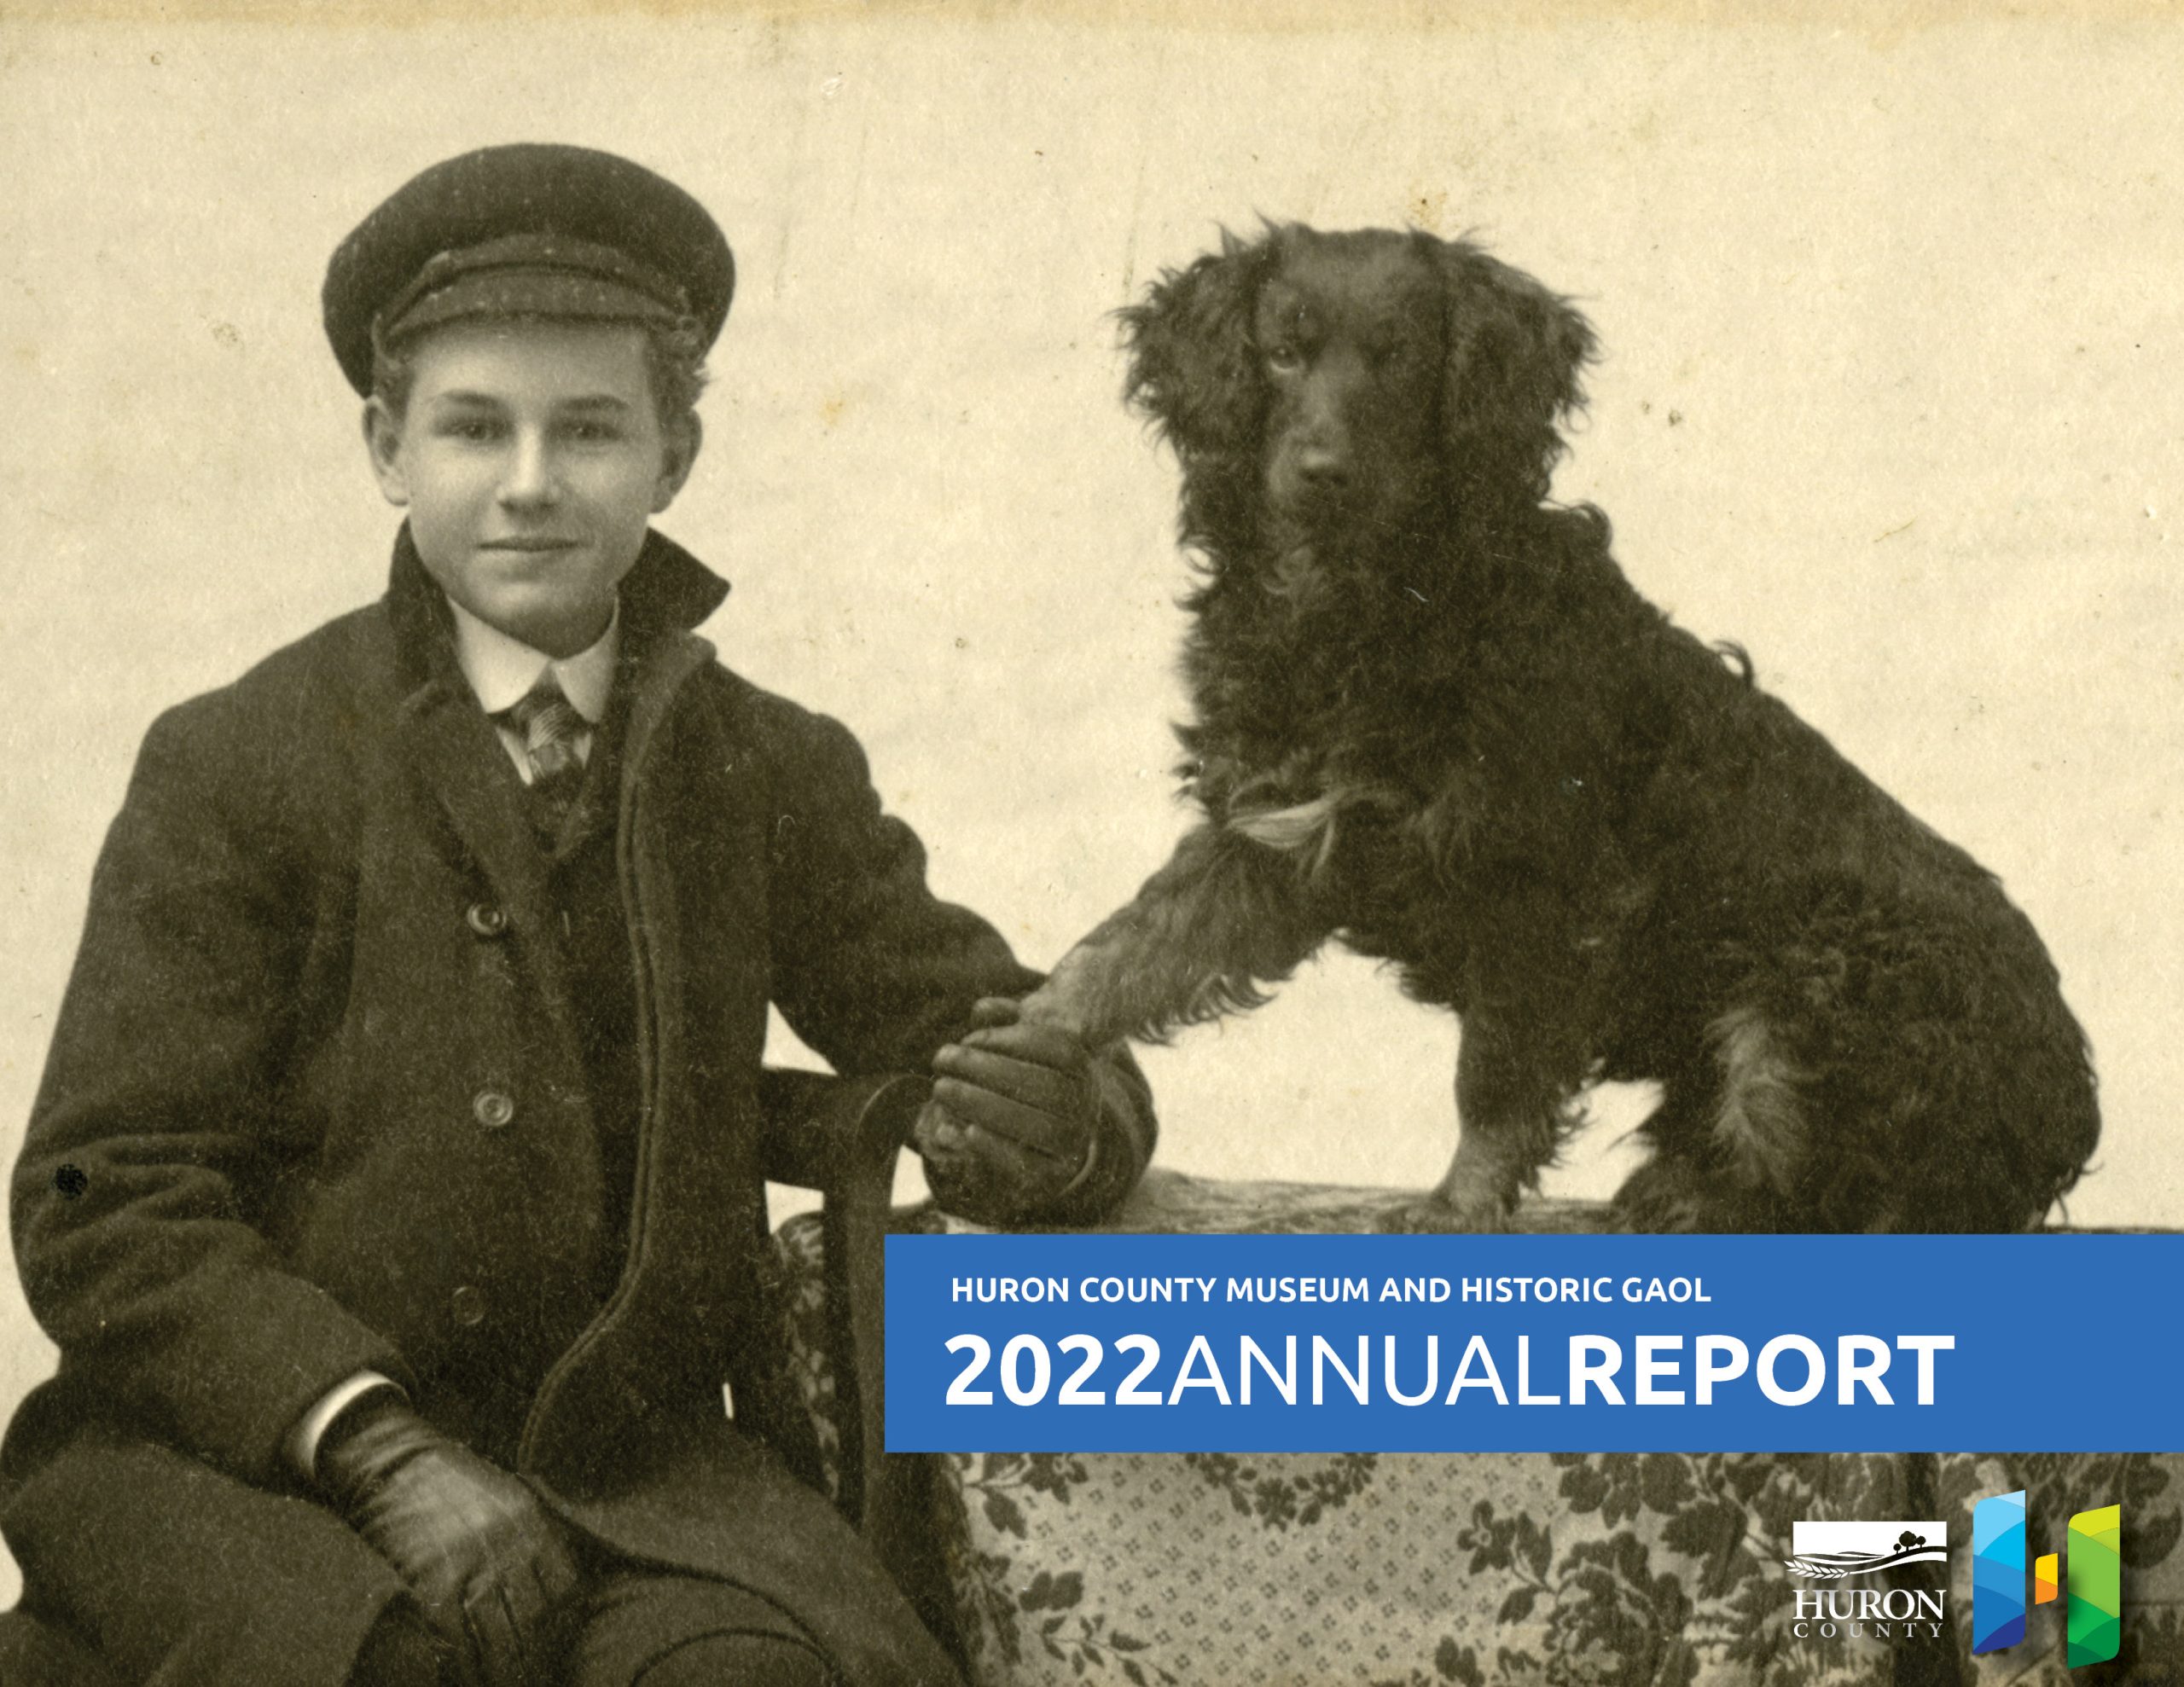 Cover image of the Museum 2022 Annual Report featuring an historic portrait image of a boy and a dog